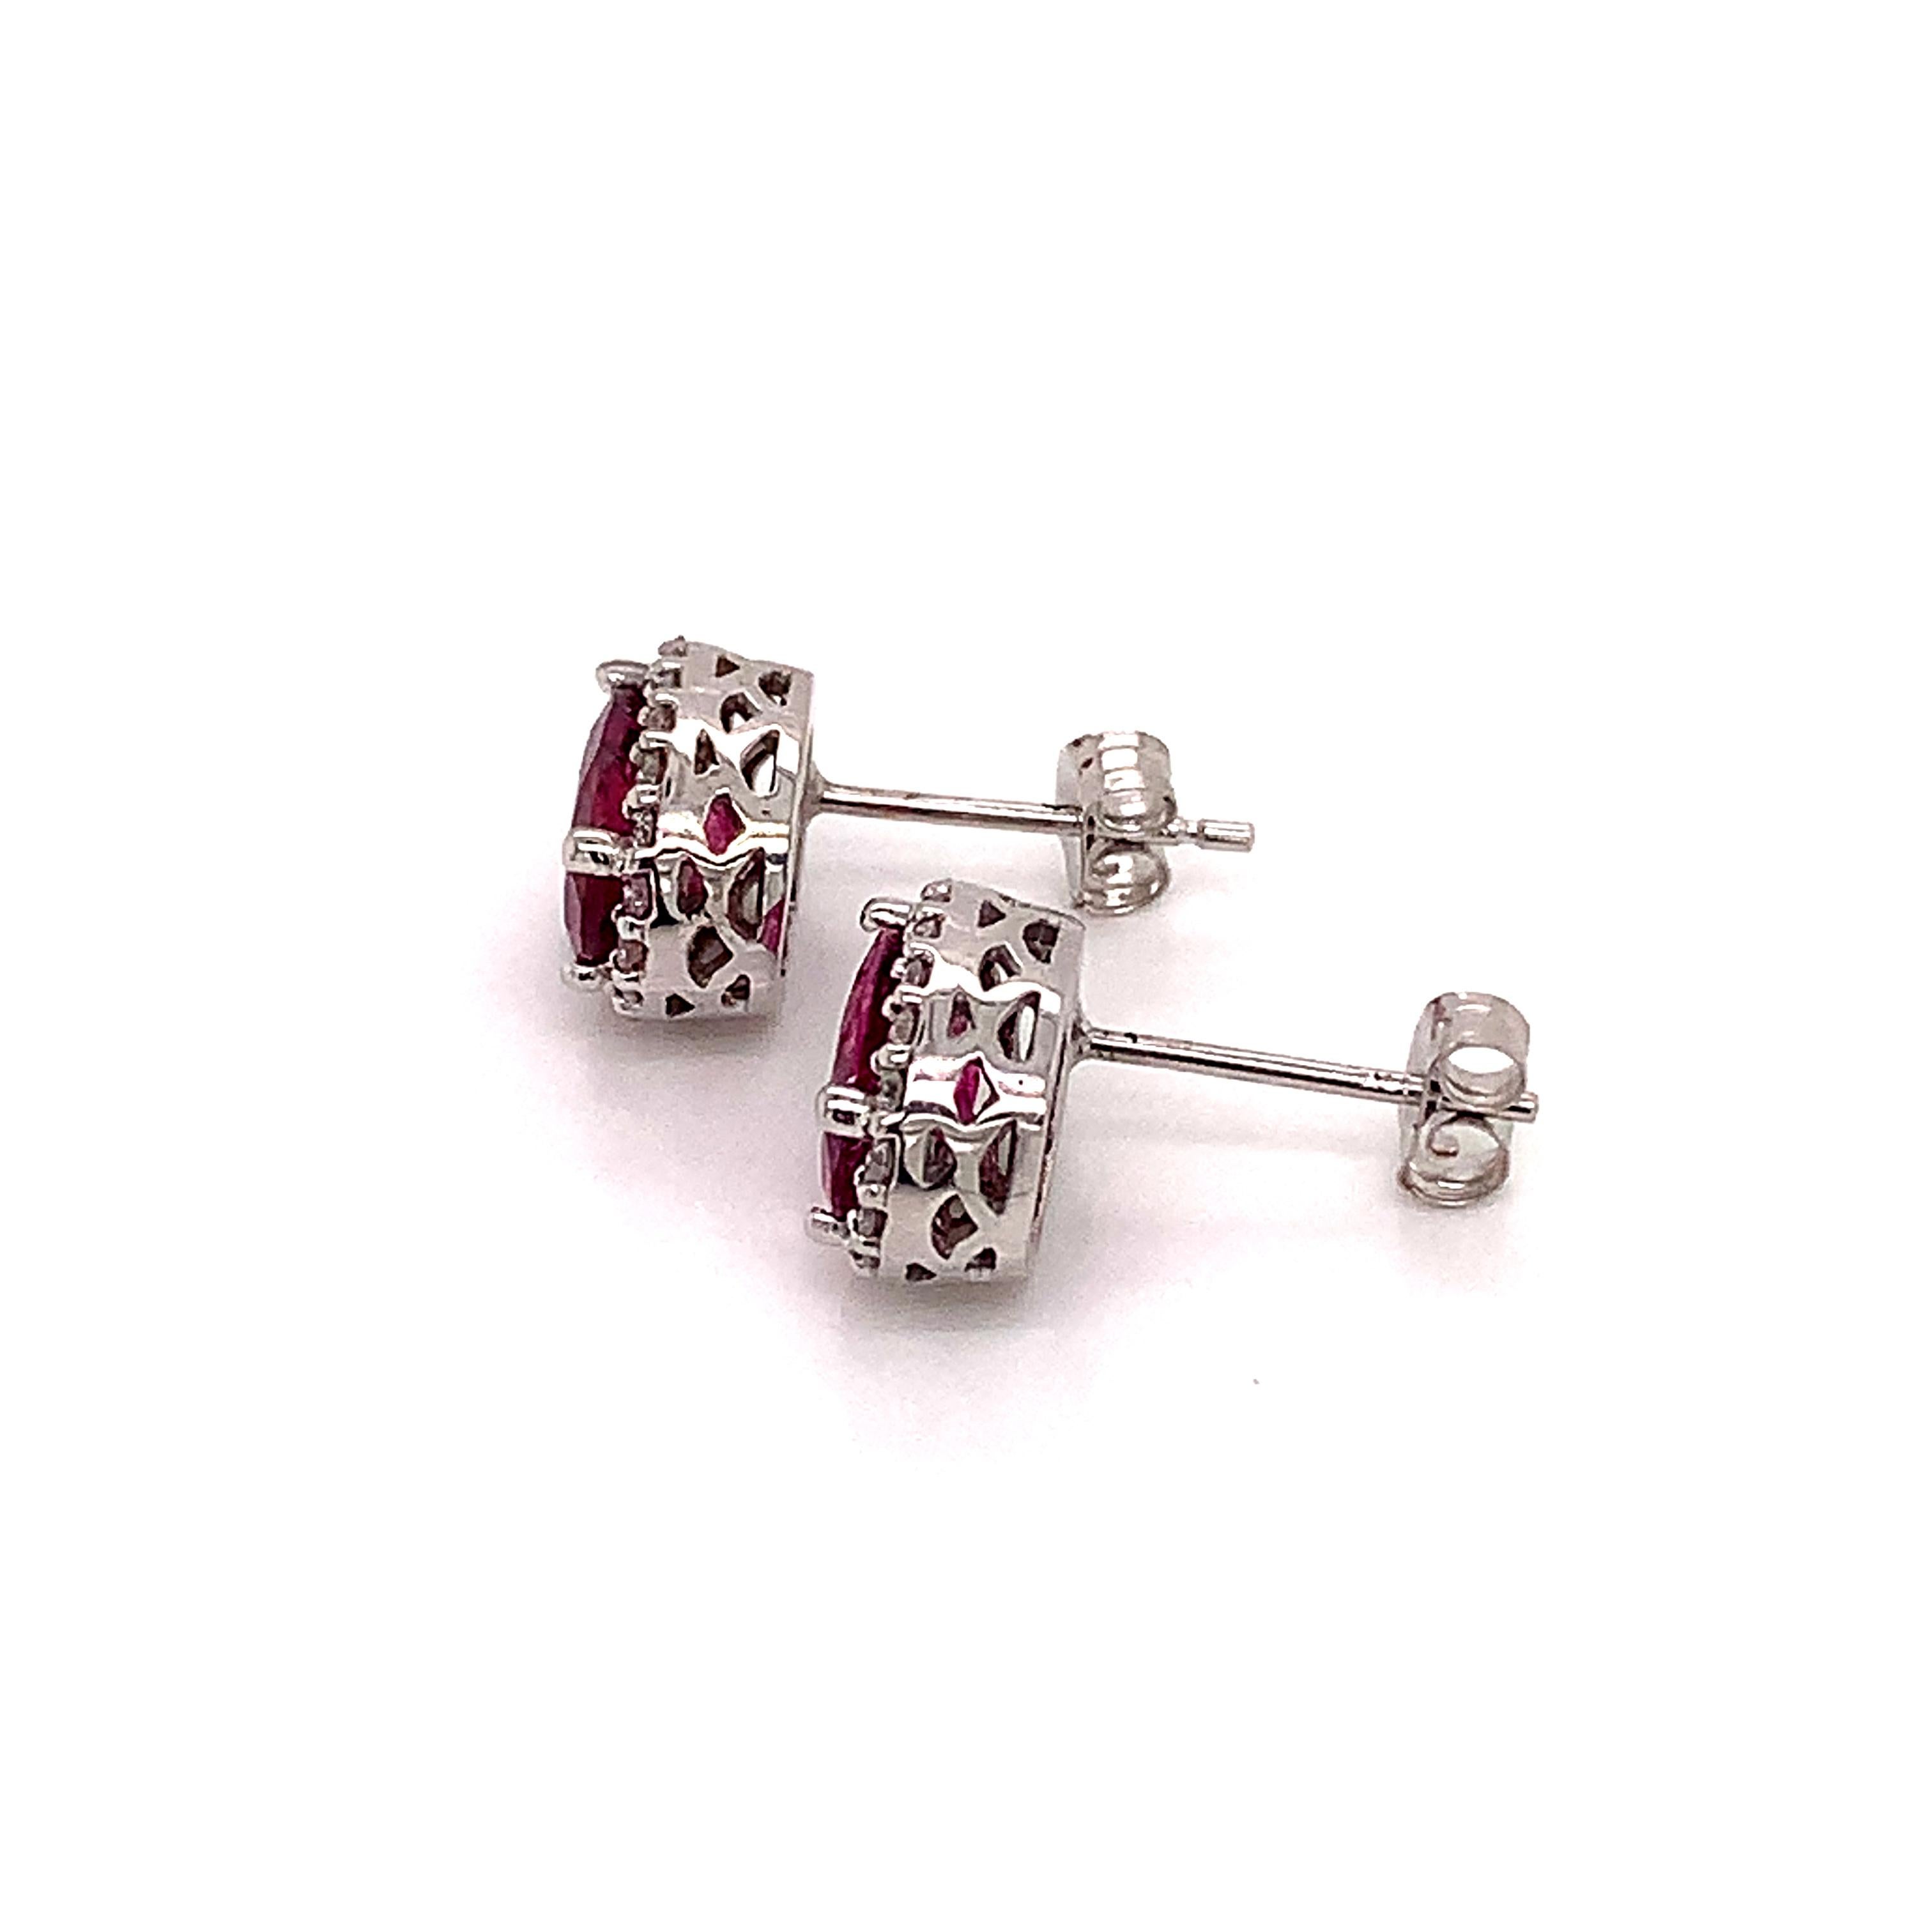 Natural Finely Faceted Quality Tourmaline Diamond Stud Earrings 14k Gold 2.27 TCW Certified $4,790 121151

Please look at the video attached for this item. With the video, you can see the movement of the item and appreciate the faceting and details